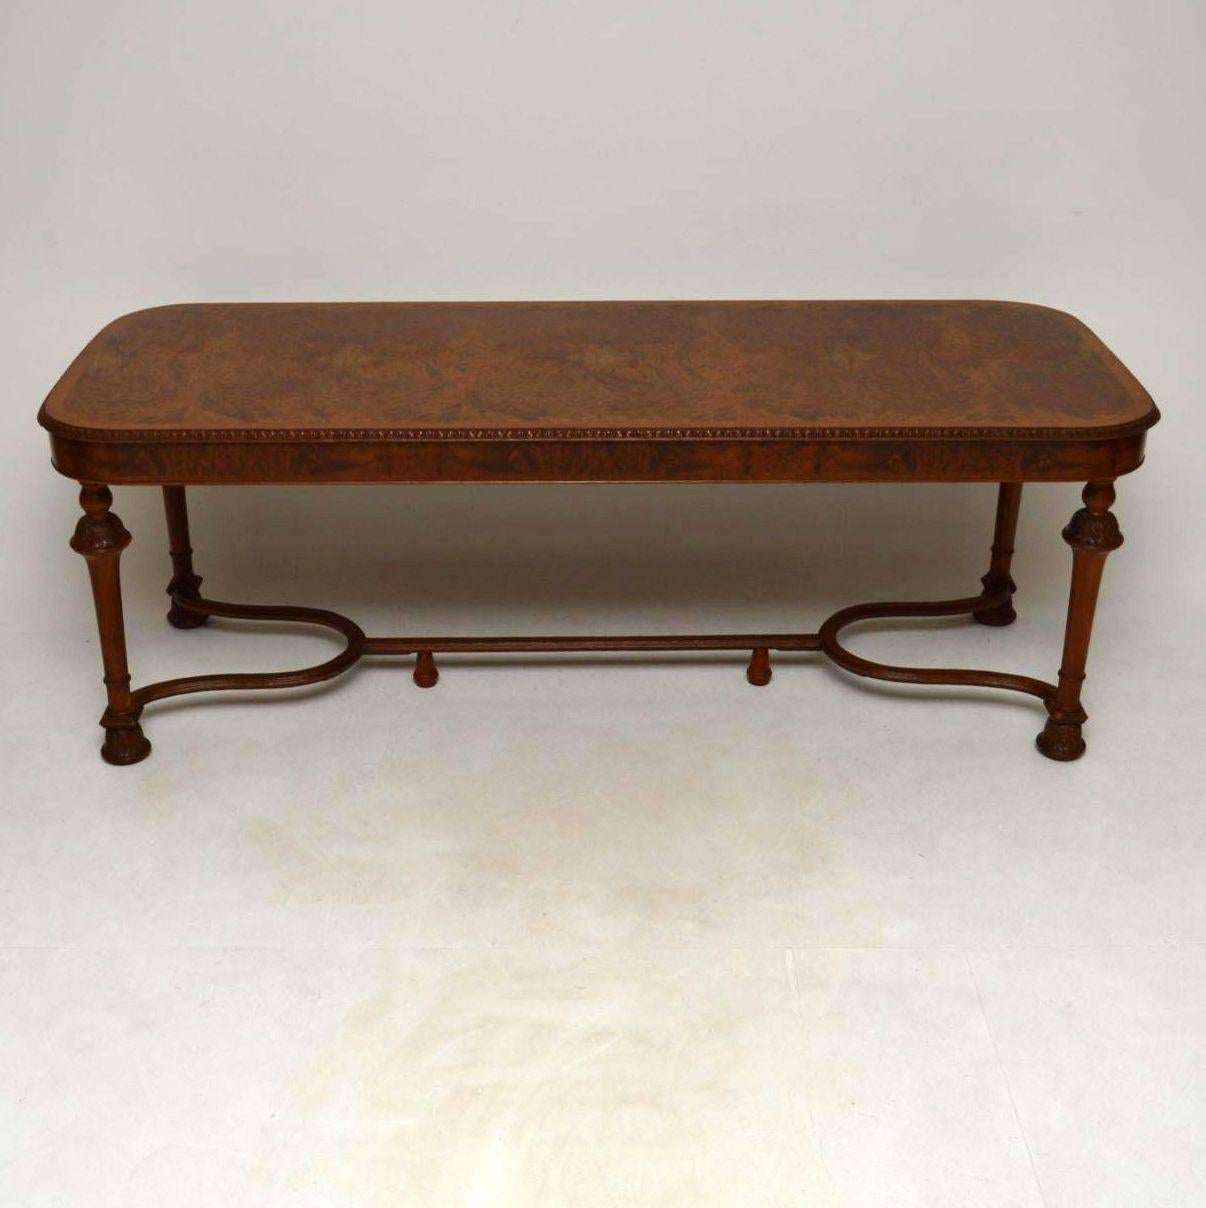 This top quality walnut long dining table is capable of seating eight to ten people and it's in great condition dating from circa 1920s period. The top is a very dense burr walnut surrounded by a figured walnut cross banded and carved top edge. The